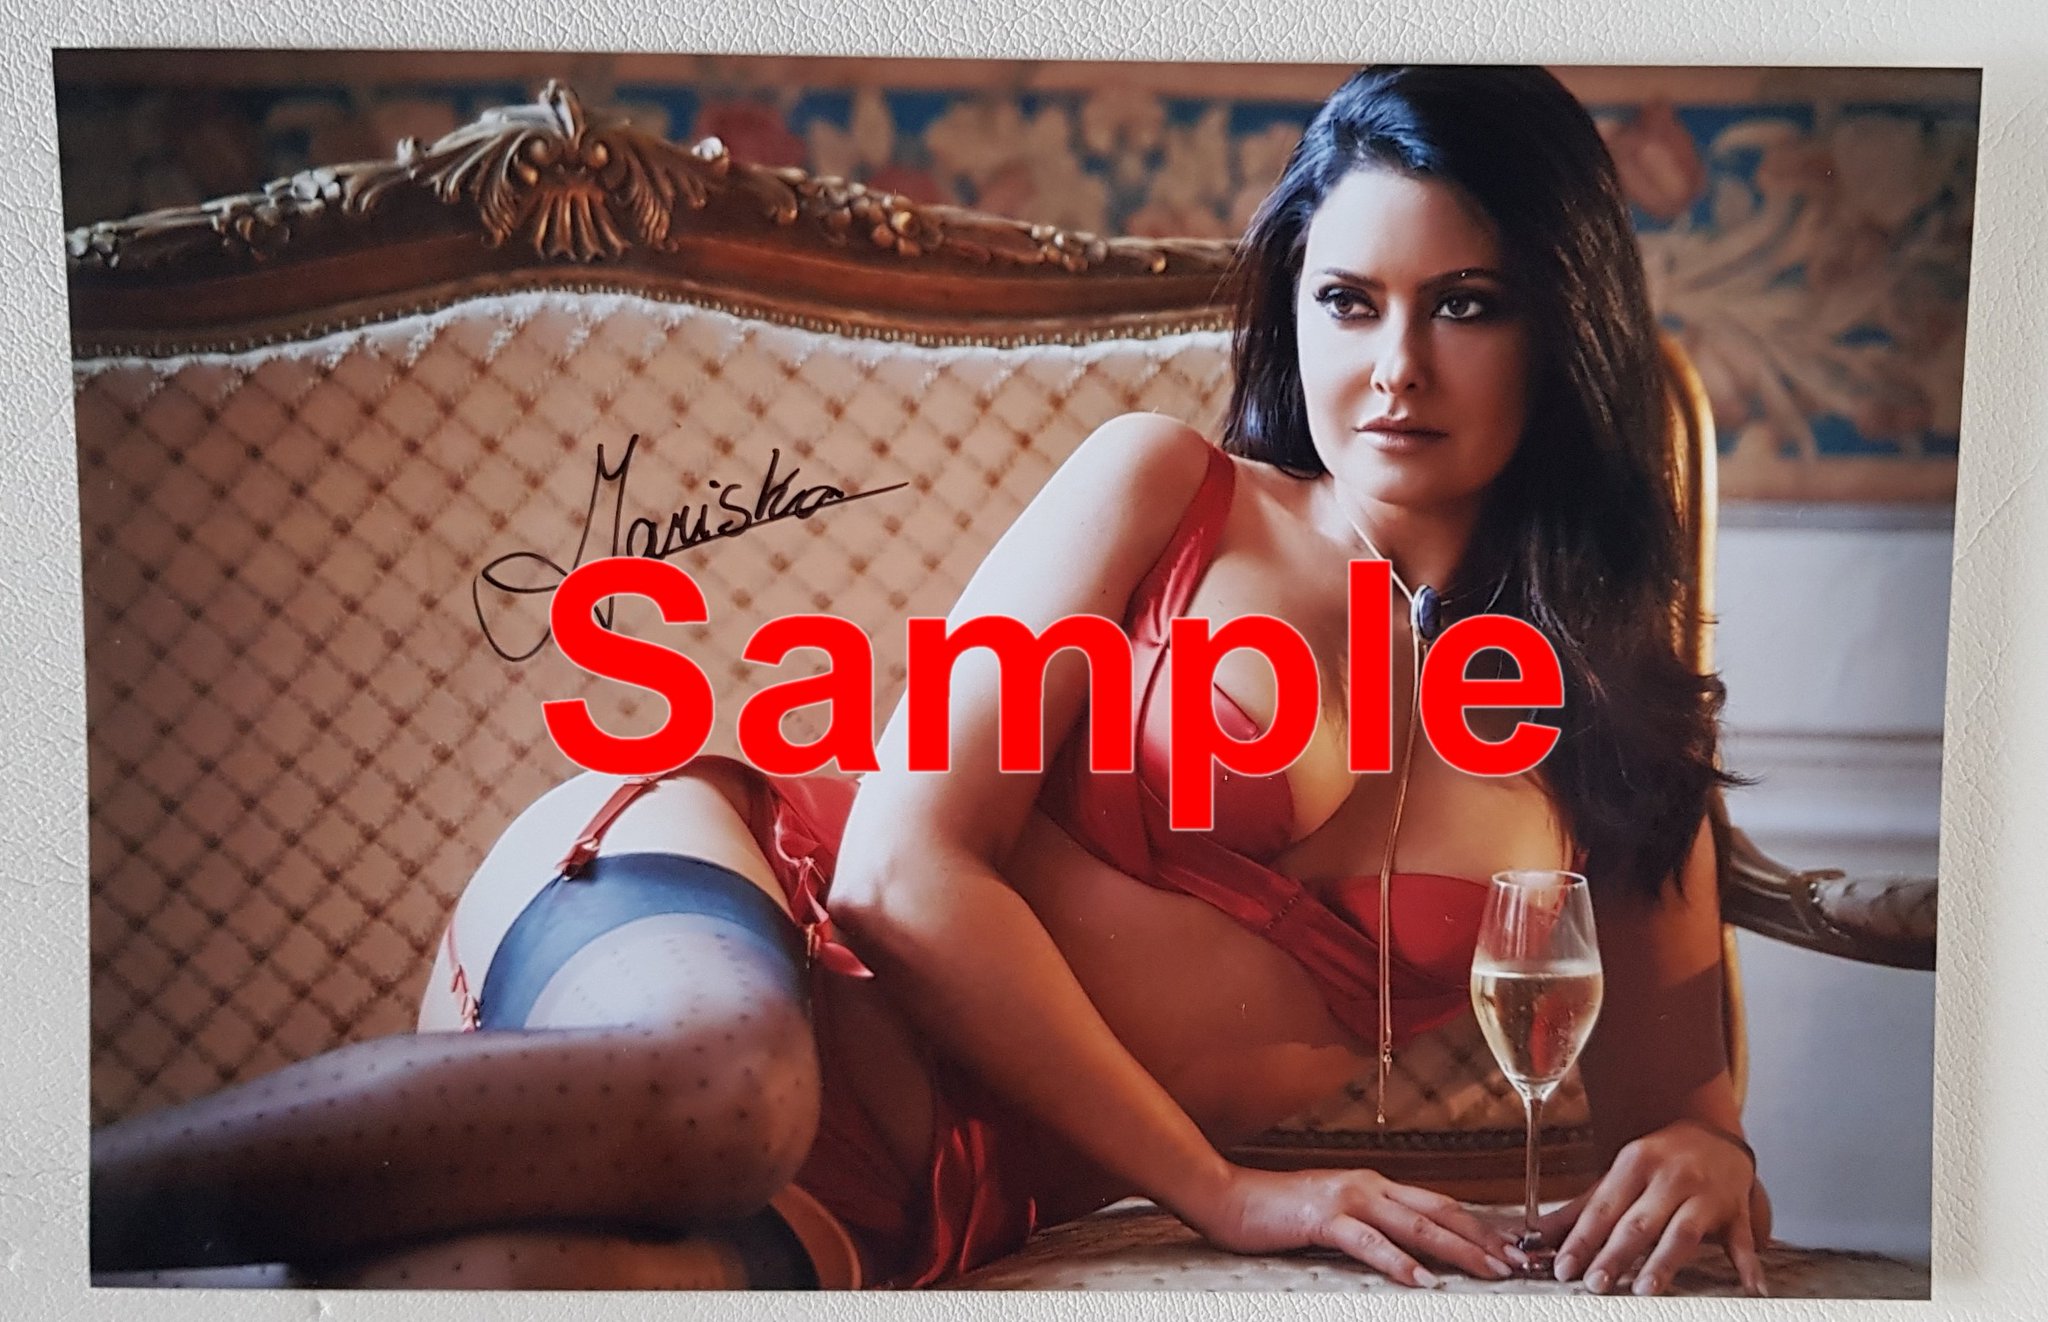 2 pic. Autographed photo (19x11) with COA from JSA
Limited edition 2 sets of each 25.
You receive the